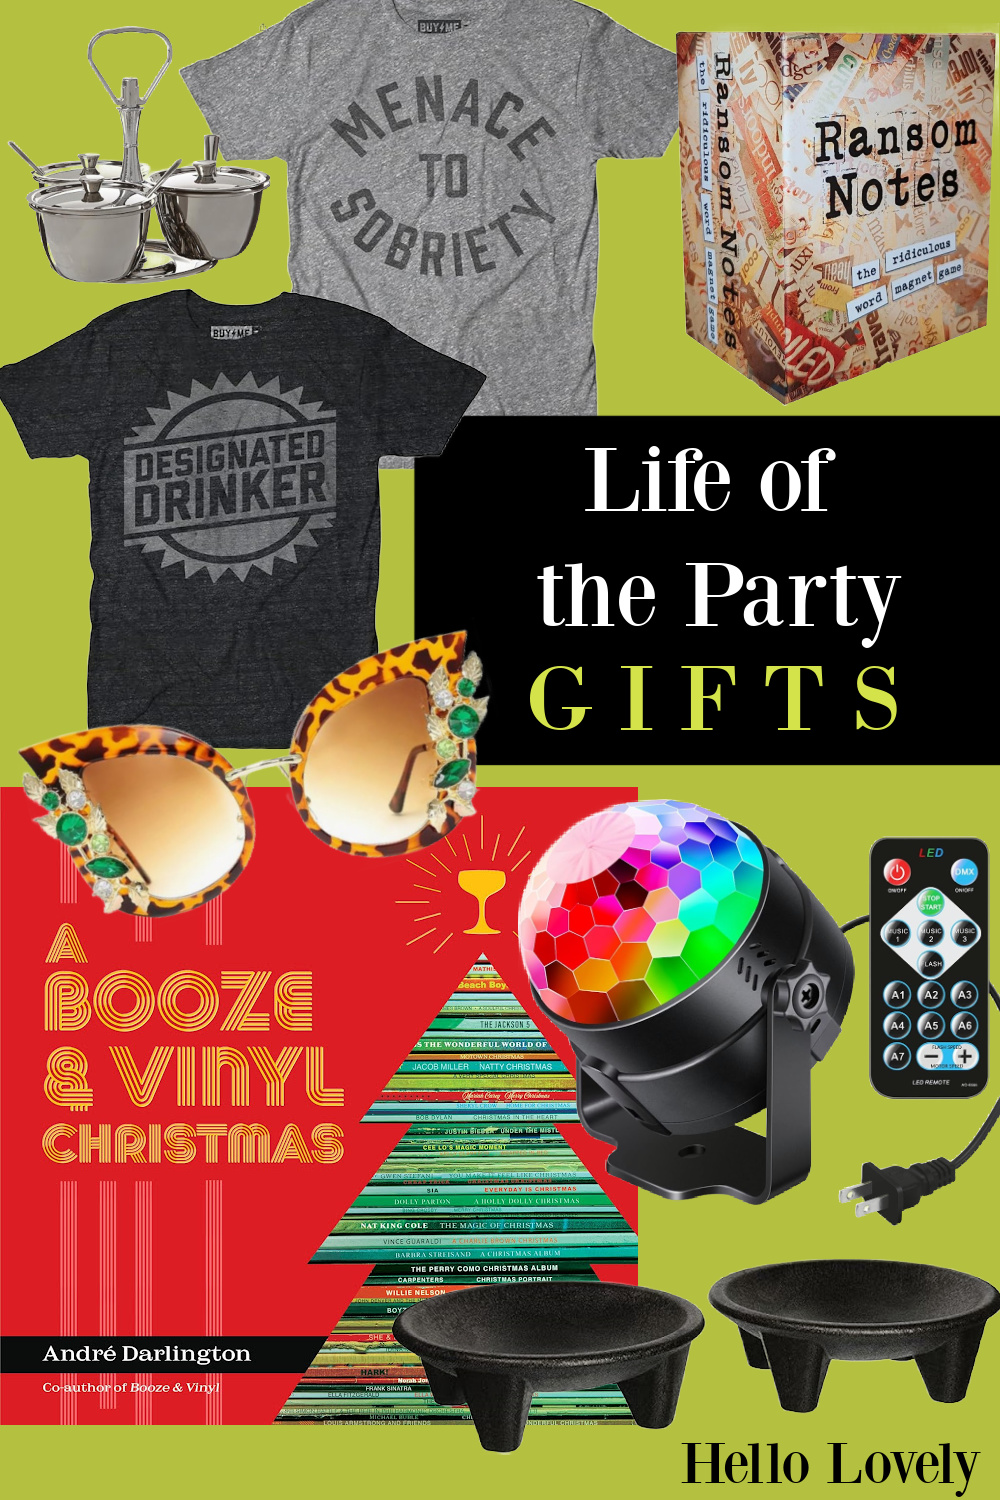 Life of the Party GIFTS - ideas for party lovin peeps. #giftguide #sillygifts